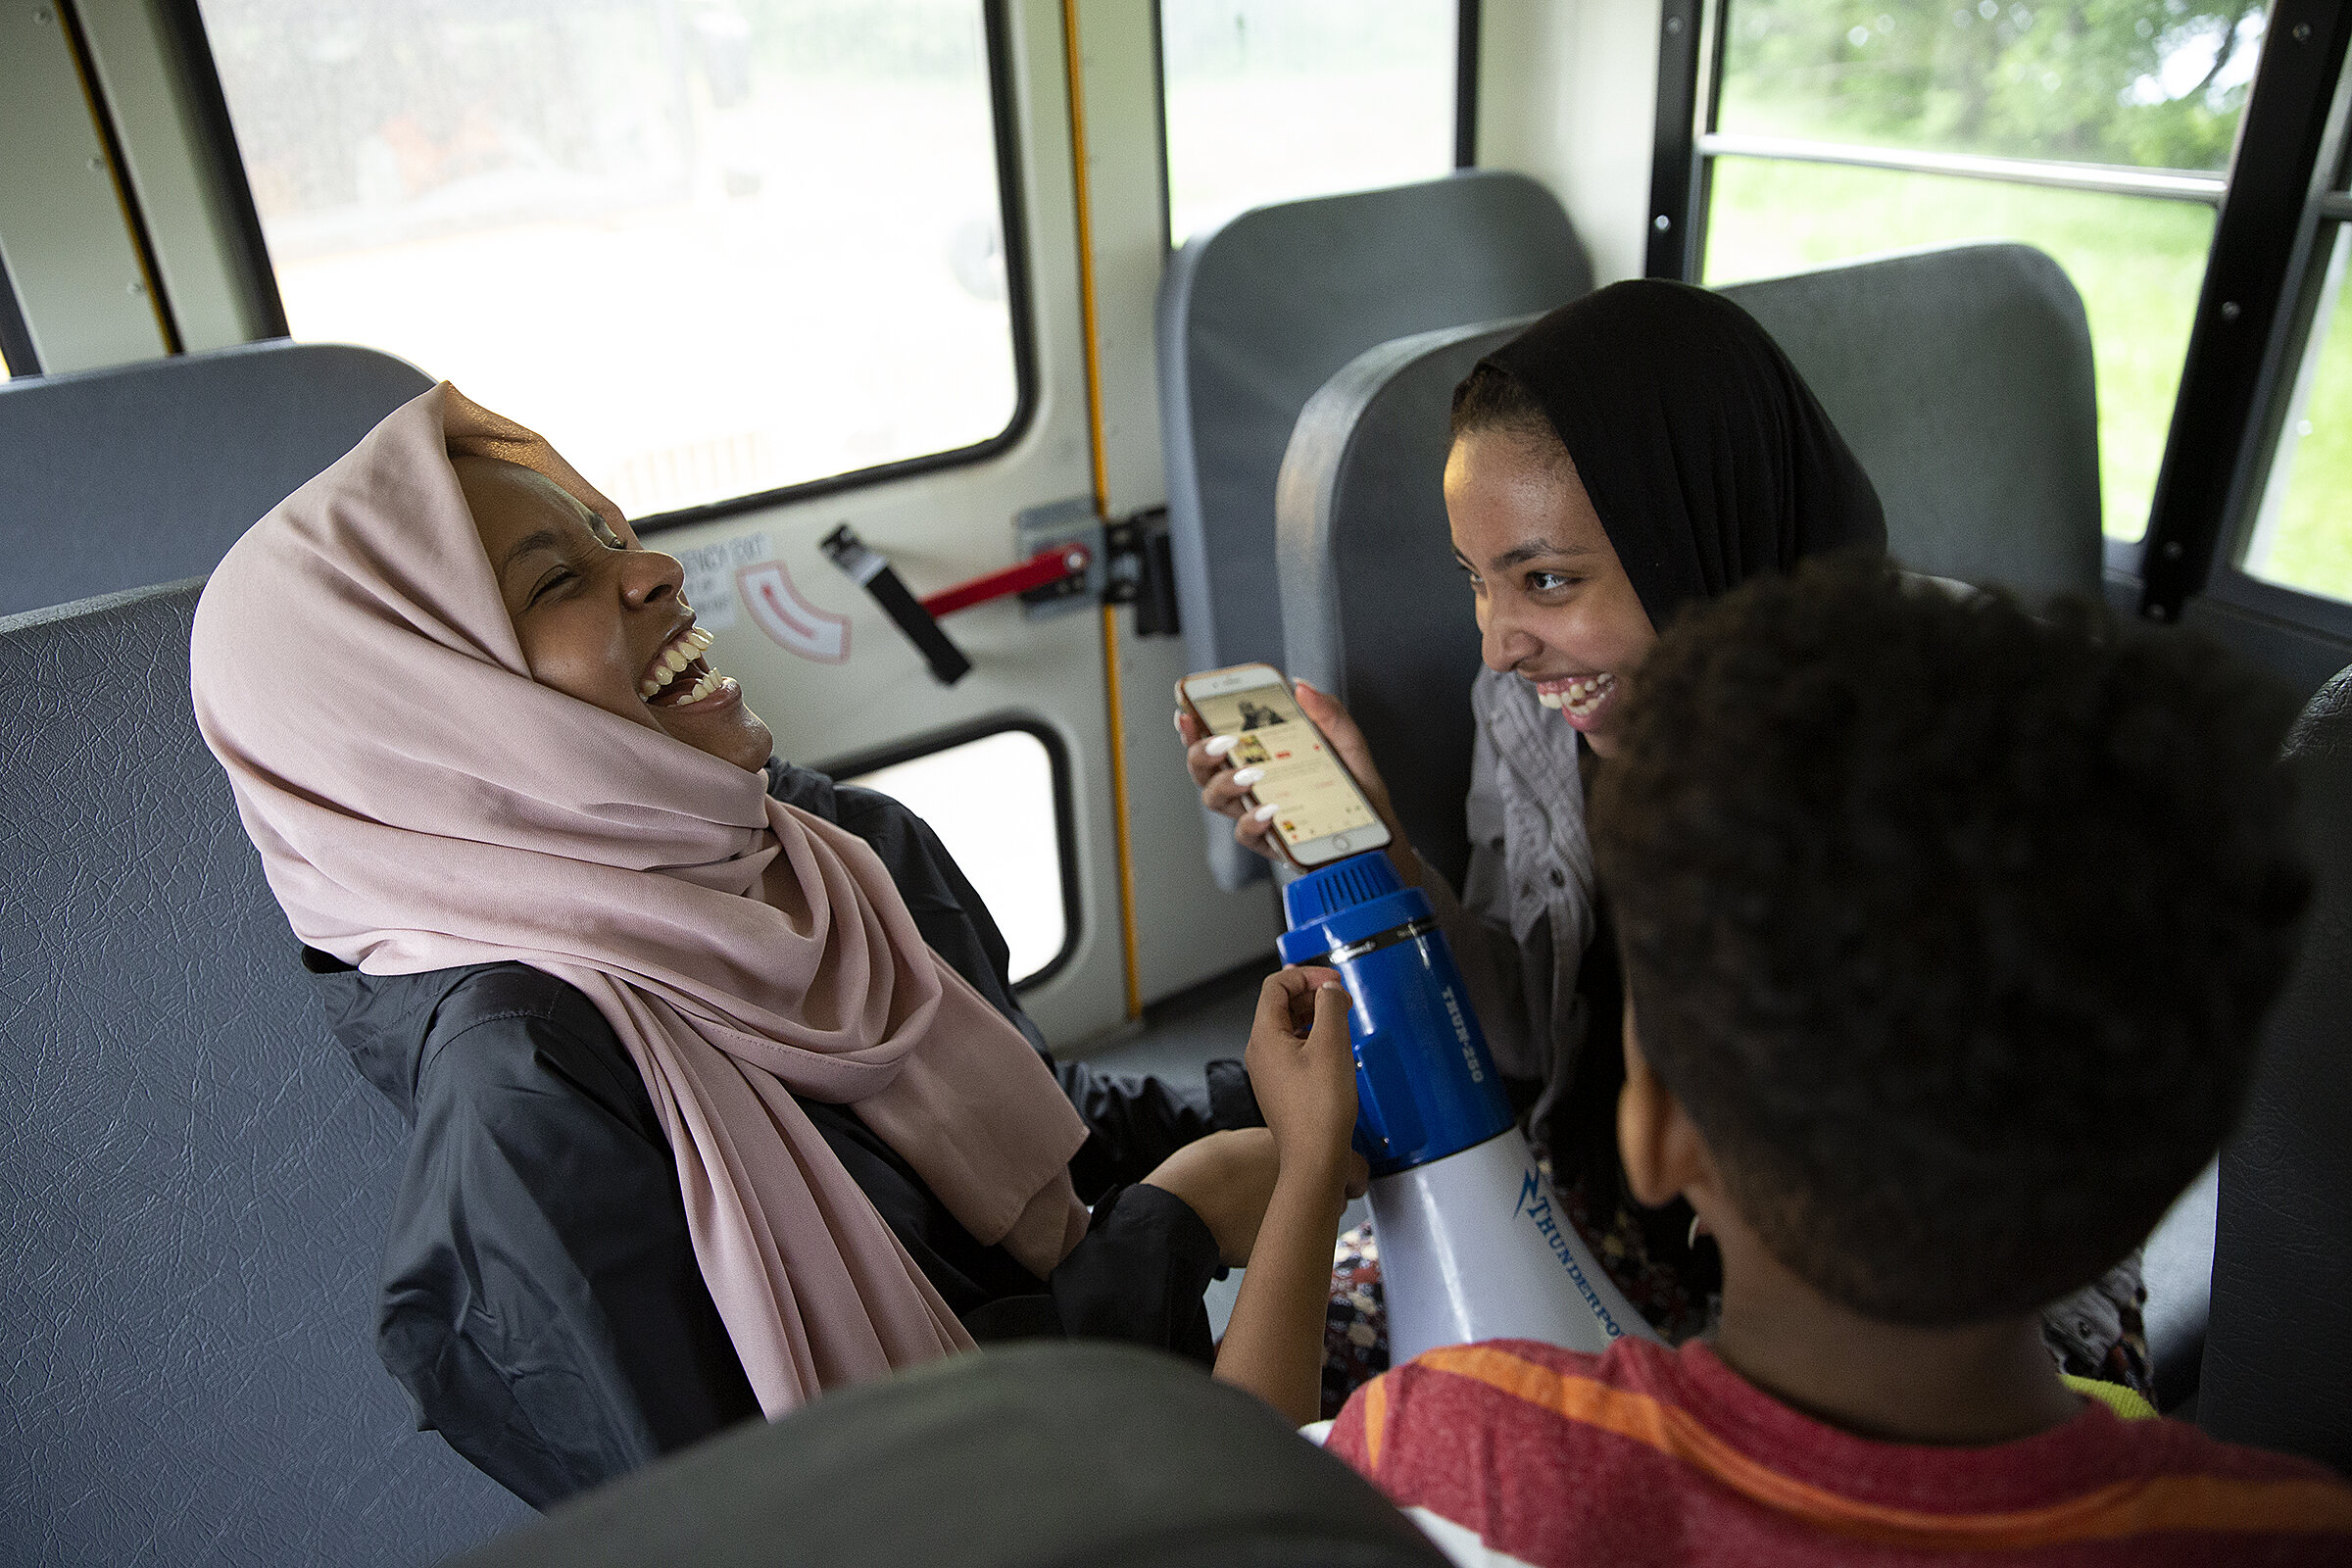  From left, Hafsa Musse, 15, and Bayaan Booker, 18, play music over the megaphone during a bus ride in New London, Minn.  